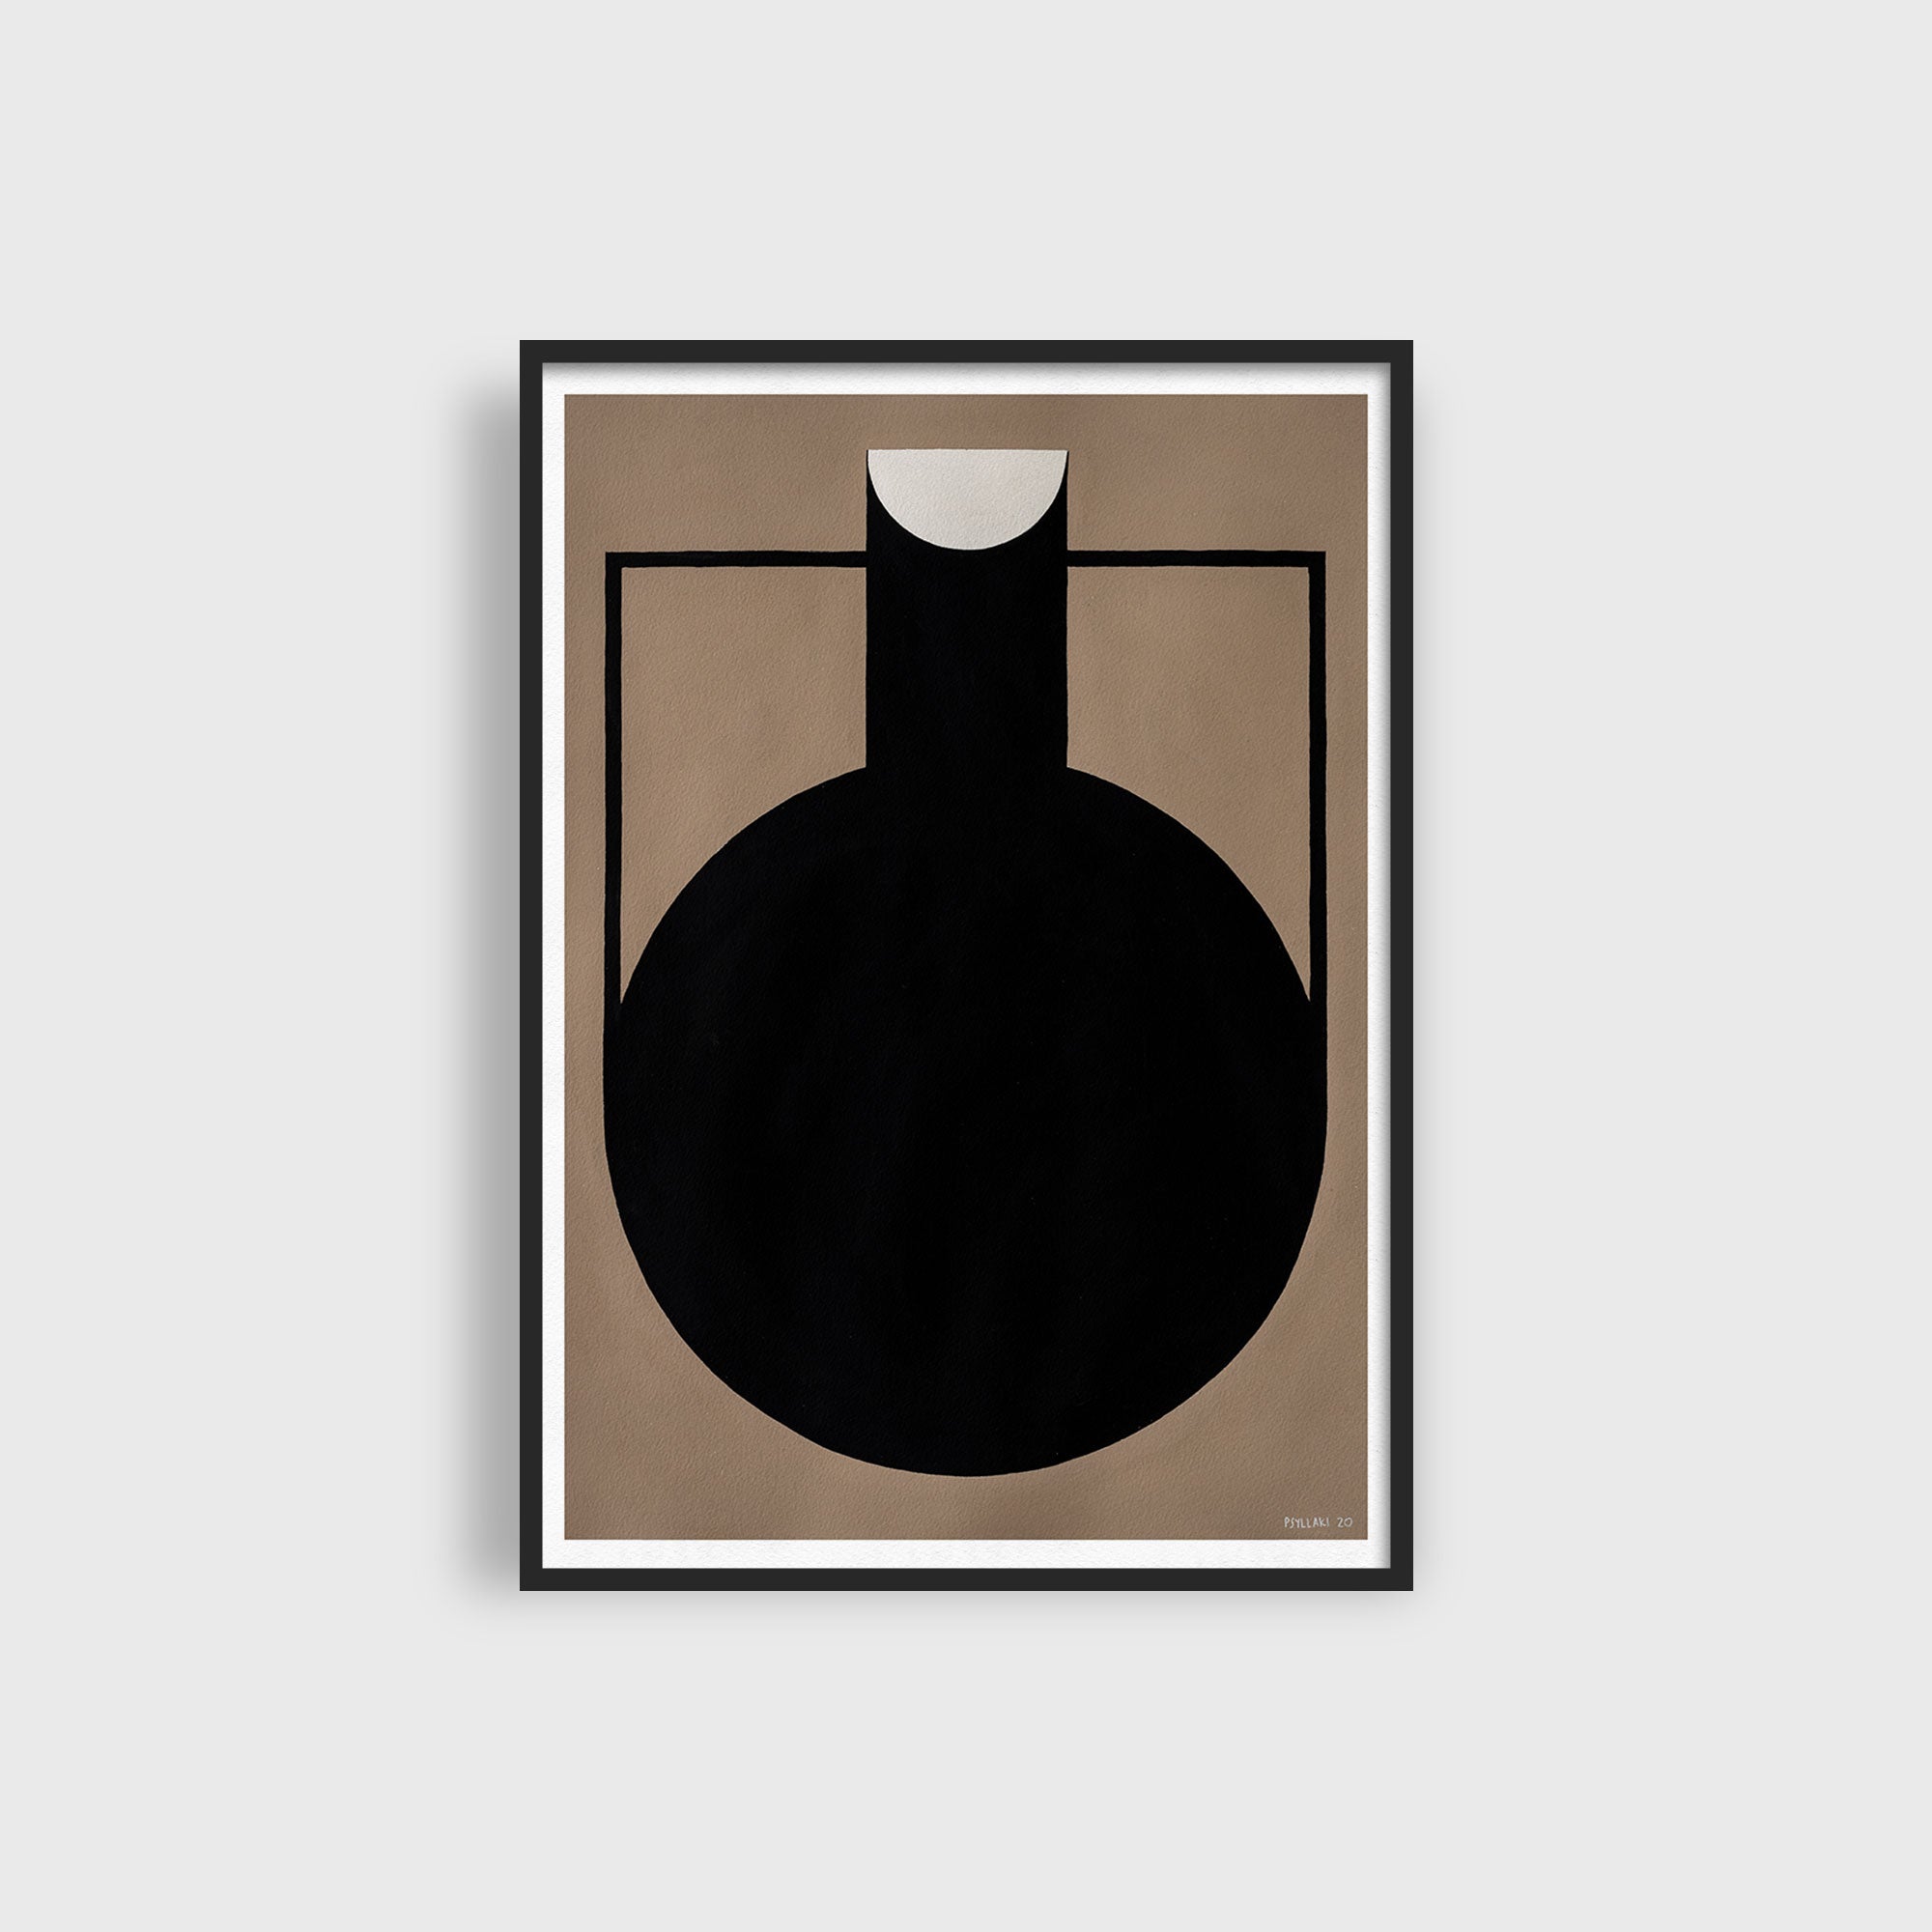 SILHOUETTE OF A VASE 01